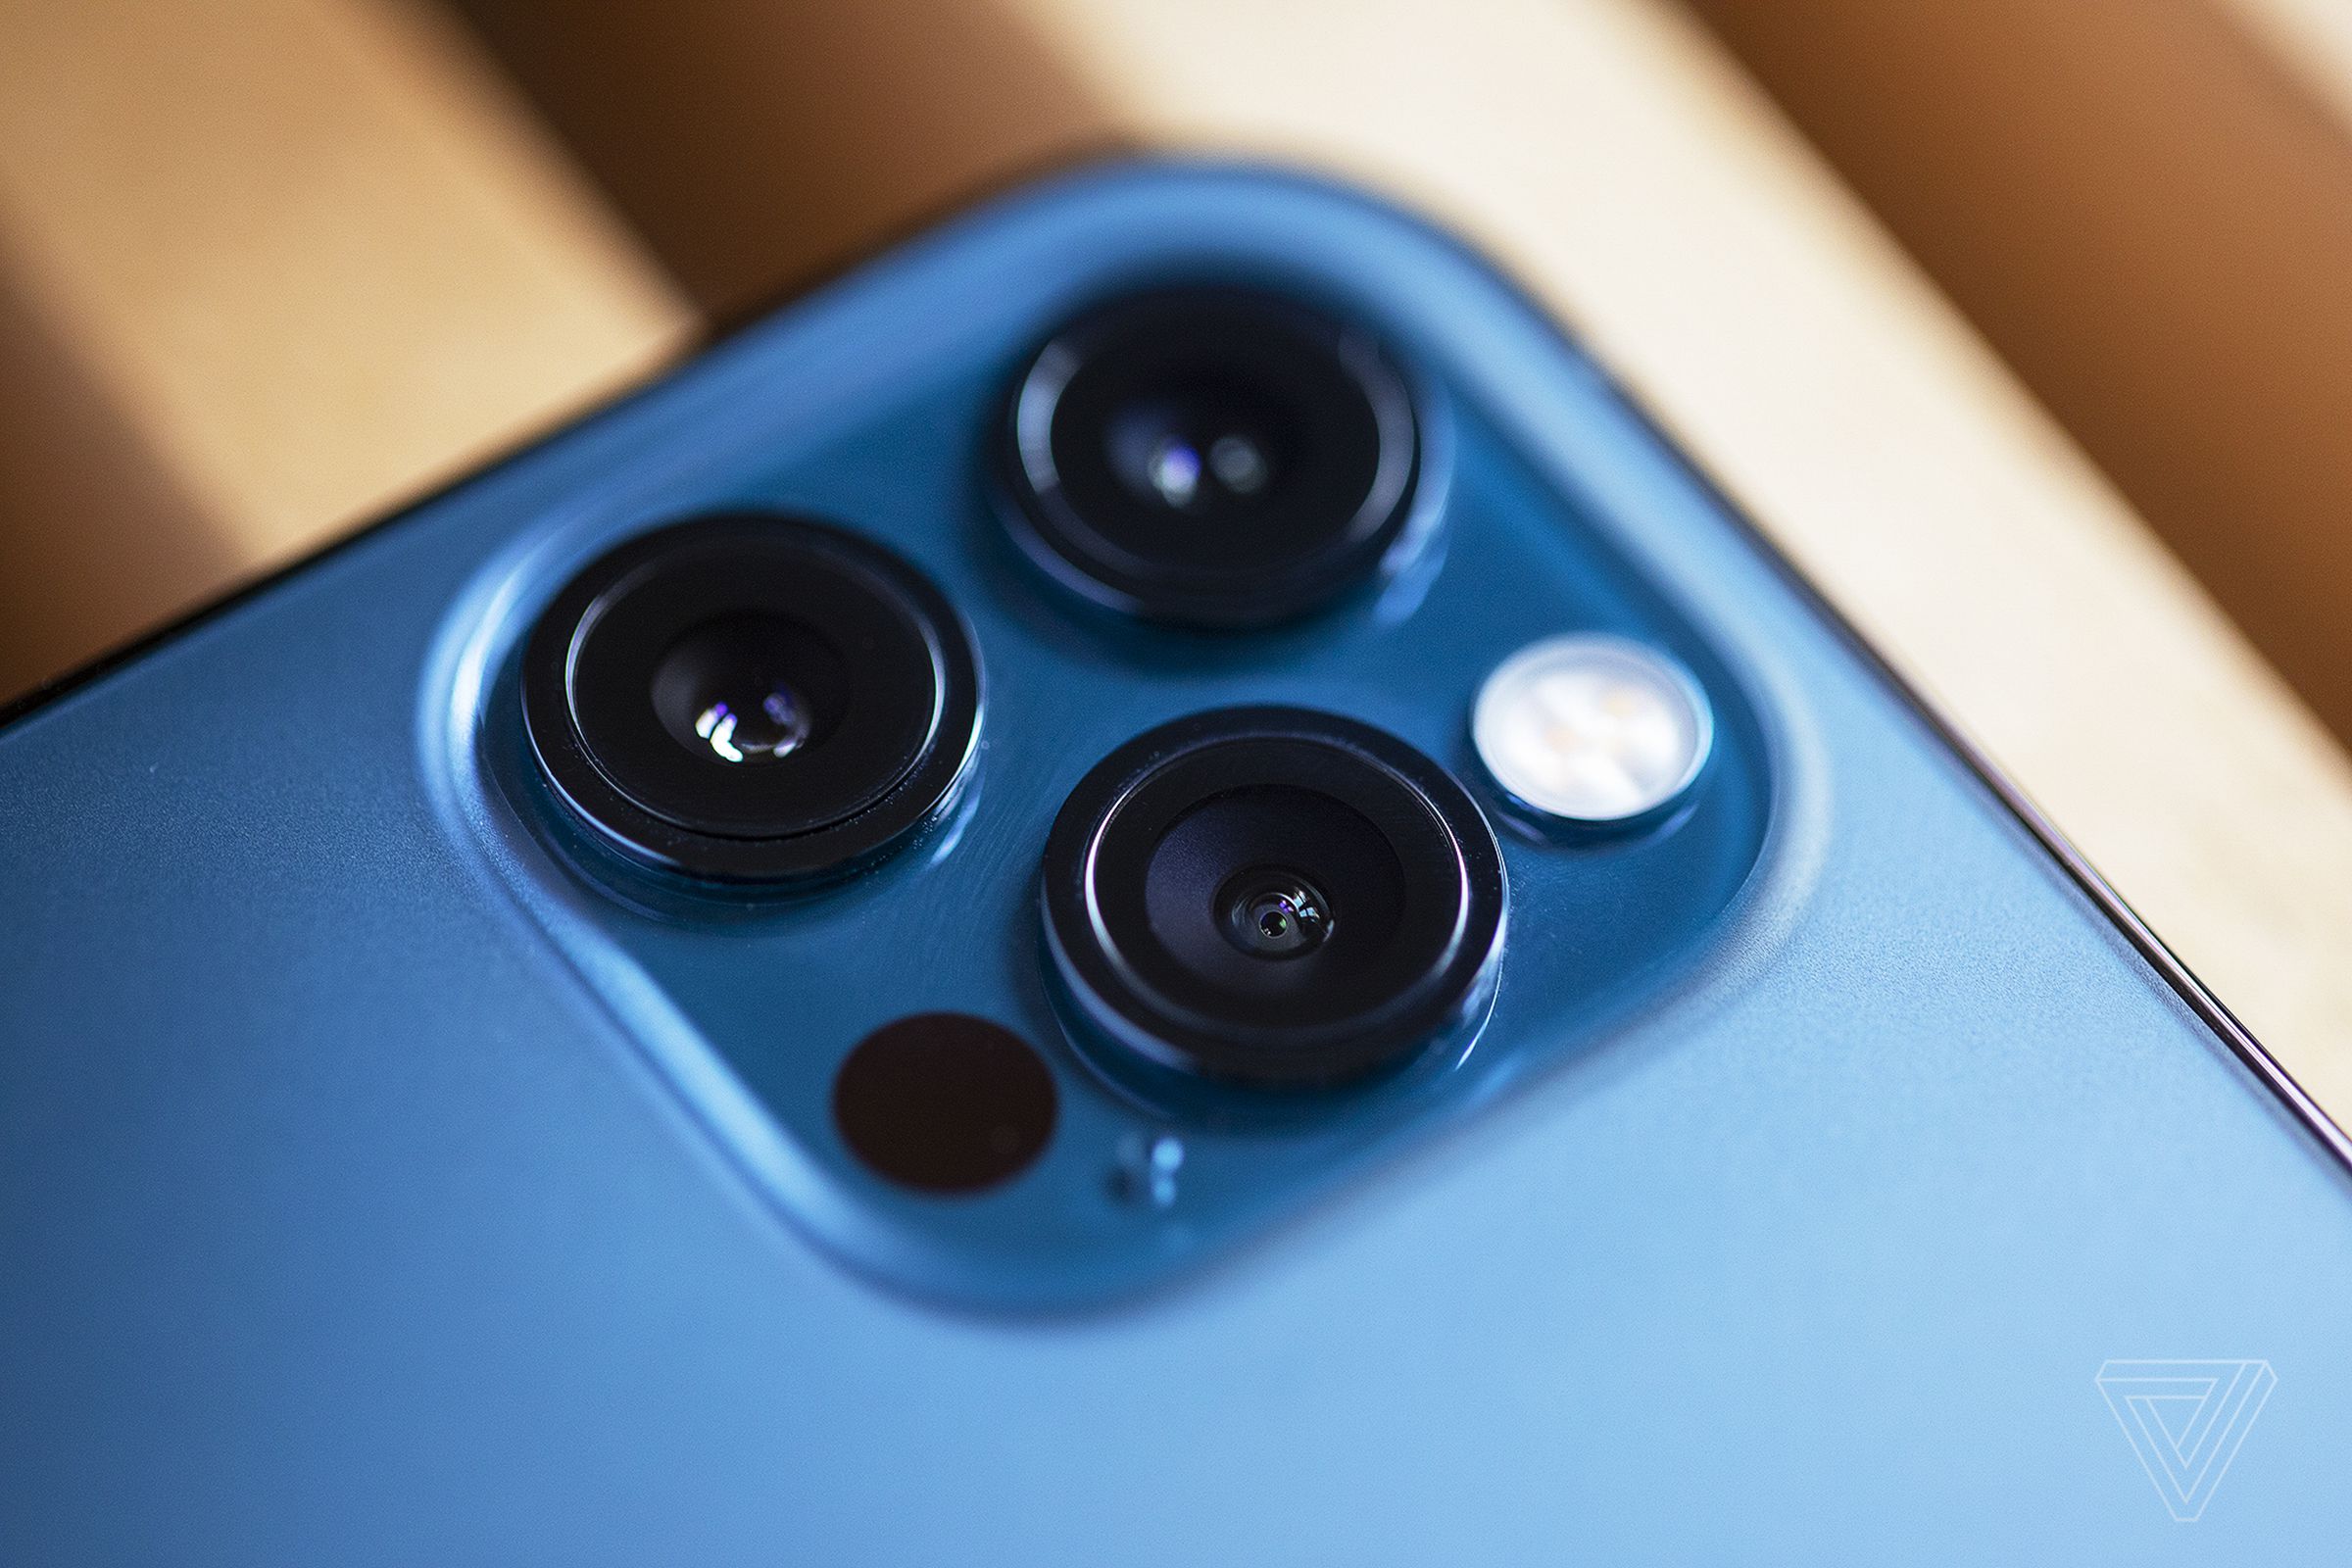 Apple says its iPhone cameras may be damaged by motorcycle vibrations